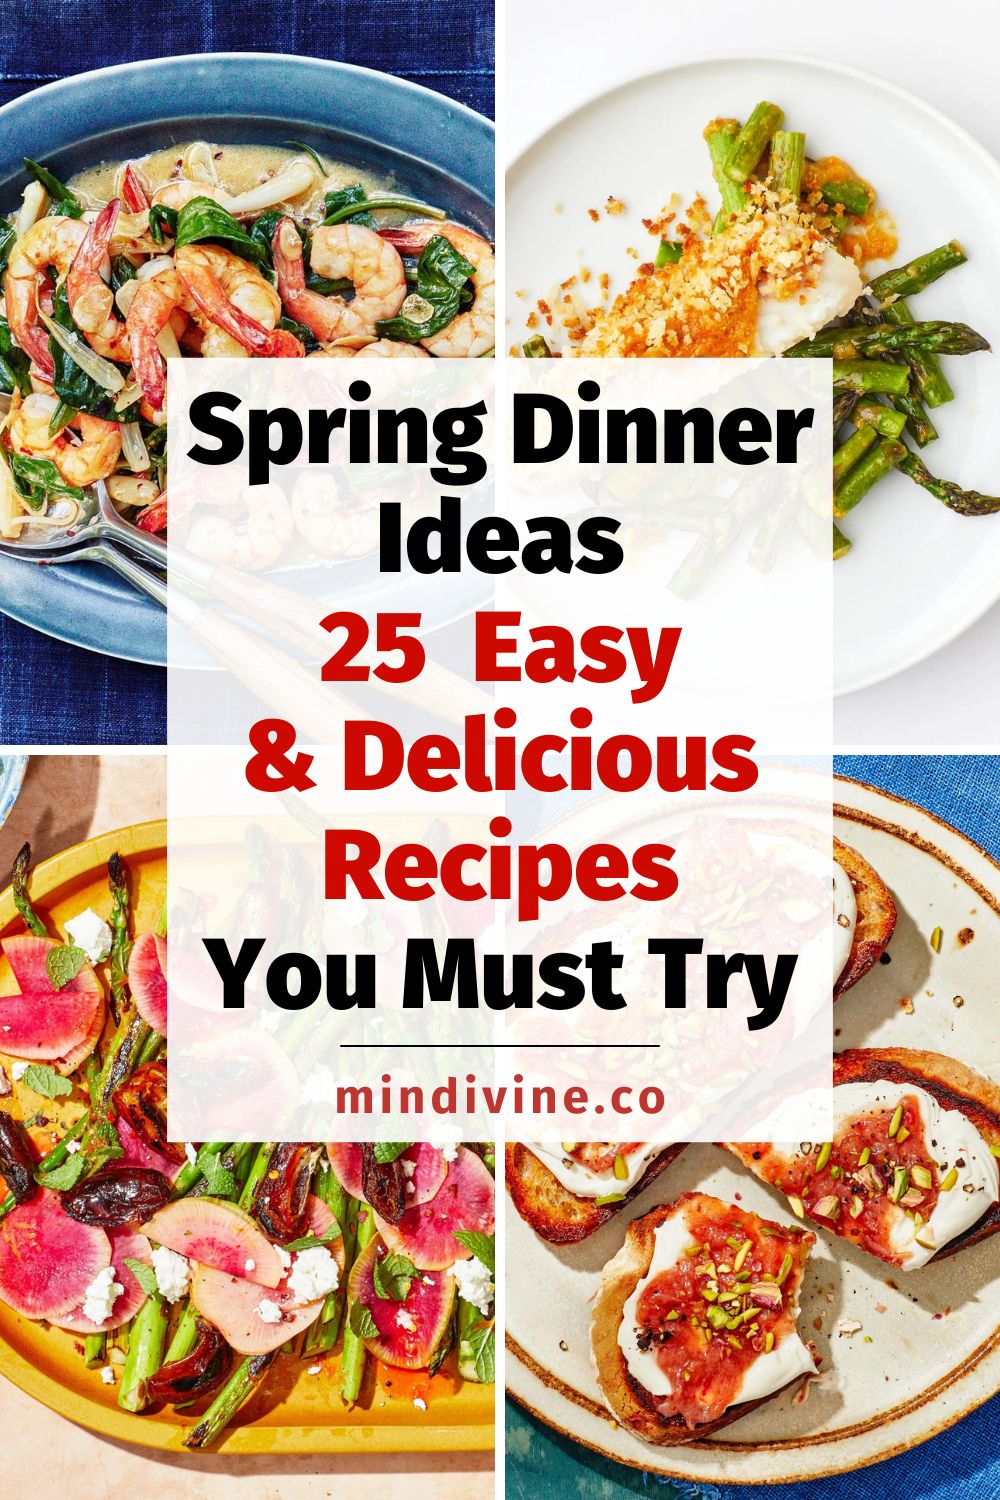 Spring dinner ideas: 4 easy and delicious recipes